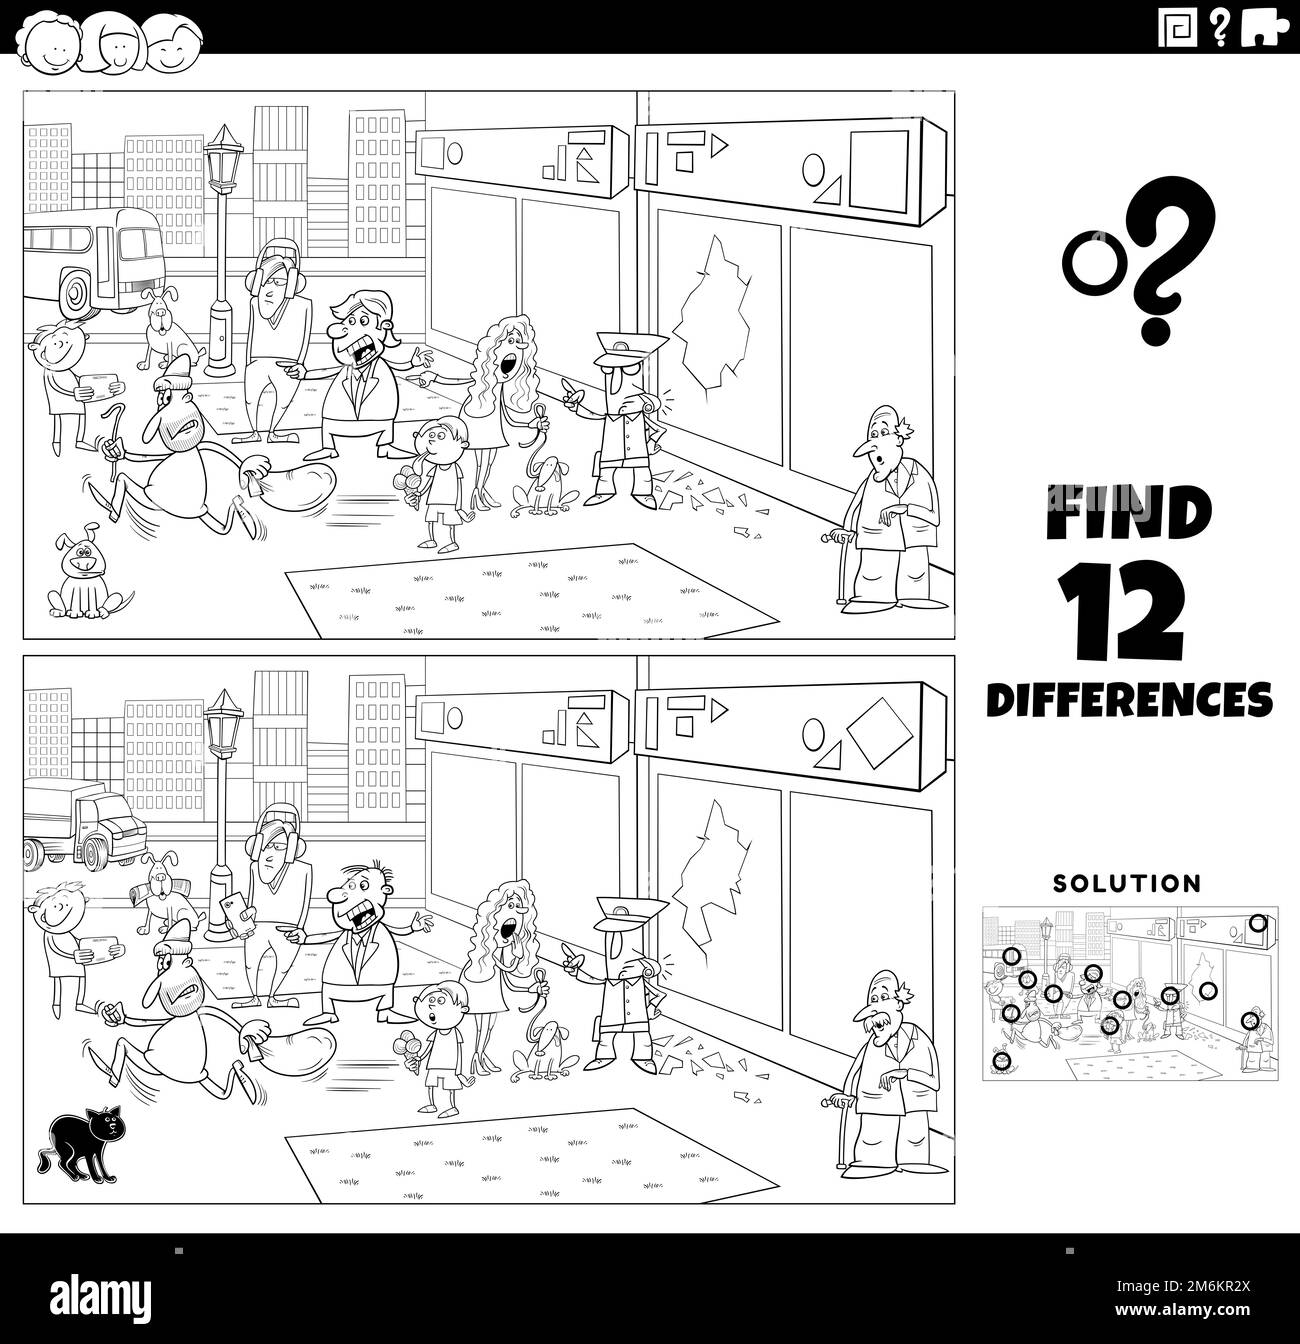 Differences game with situation in the city coloring page Stock Photo